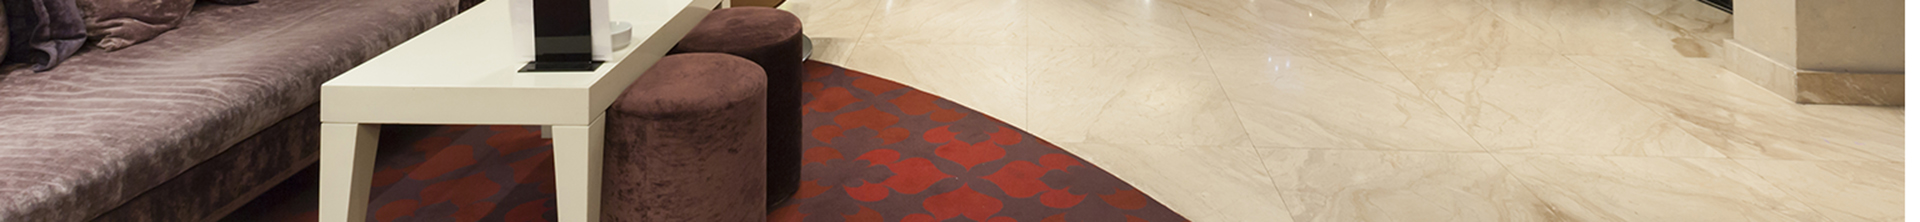 Tennant Floor Cleaning Solutions for the Hospitality Industry